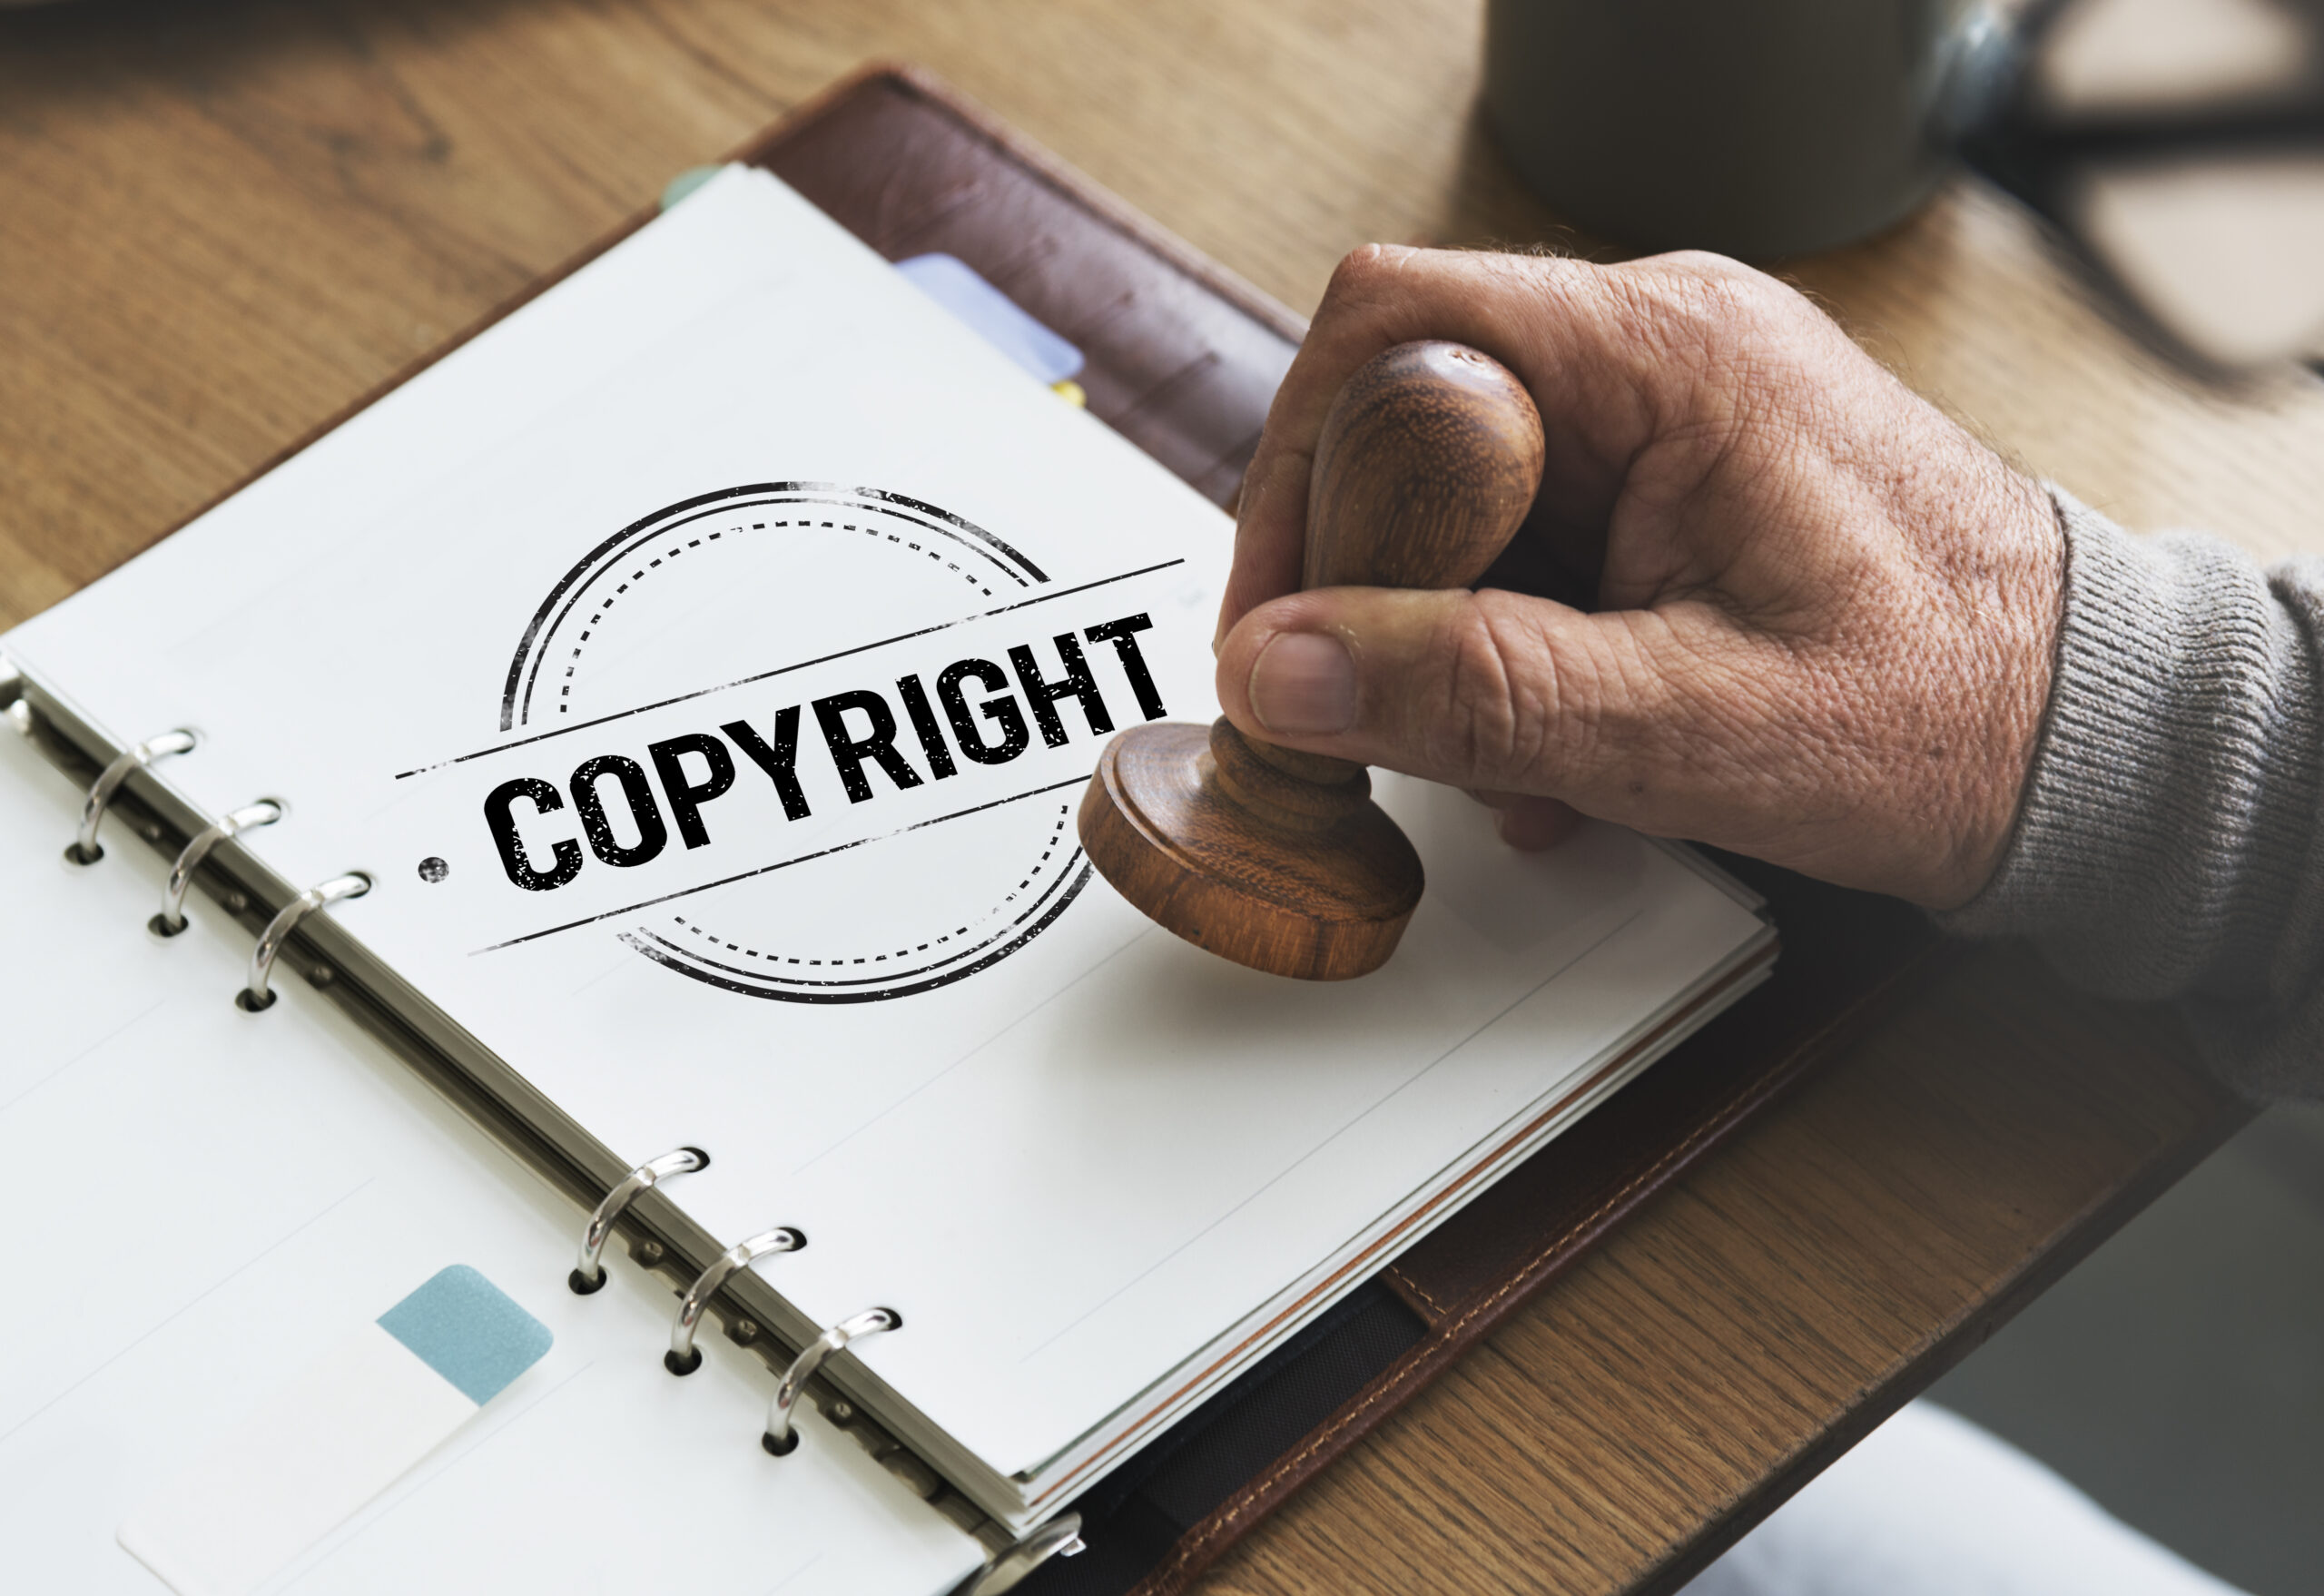 Exploring the legal implications of whether generative artificial intelligence infringes copyright.